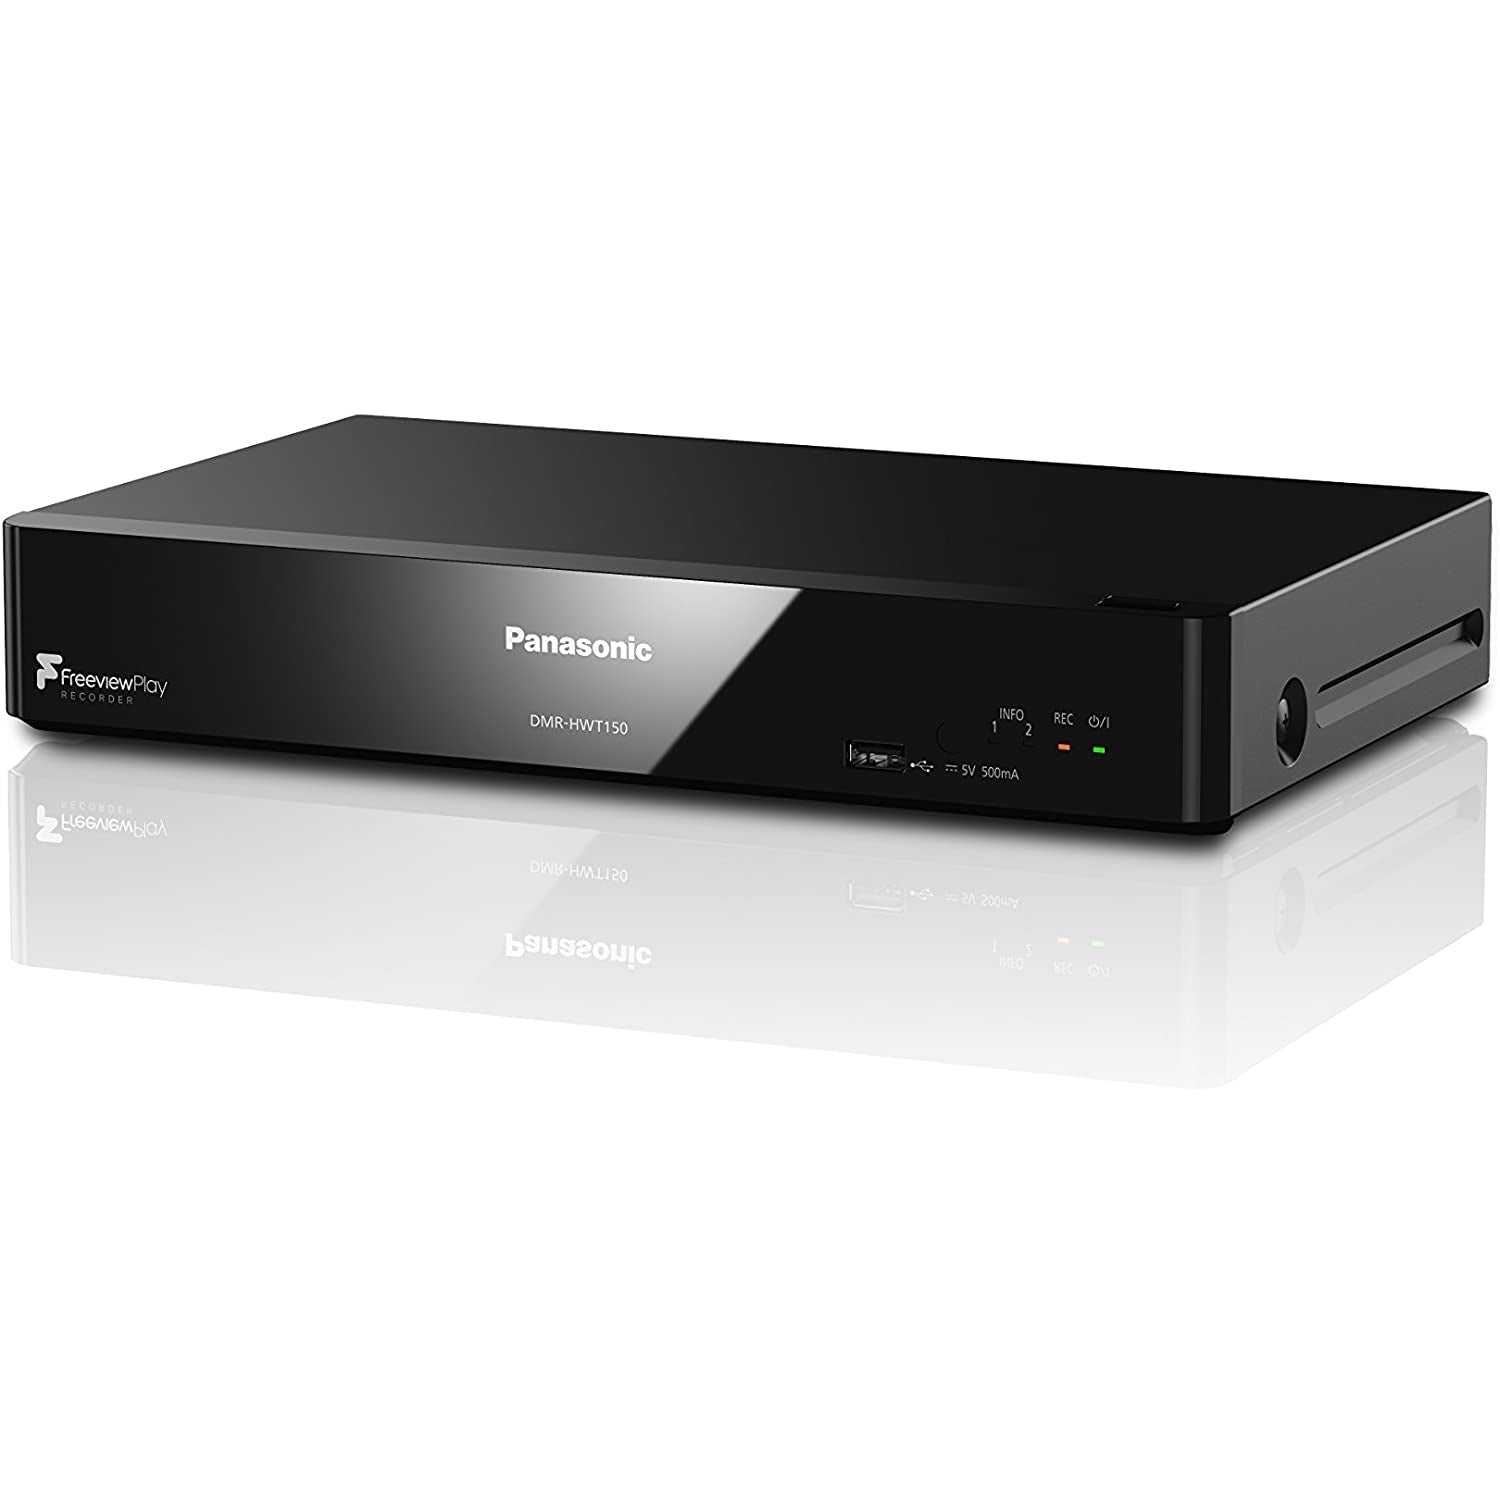 Panasonic DMR-HWT150EB Smart Freeview HD & Freeview Play PVR with 500GB HDD Recorder